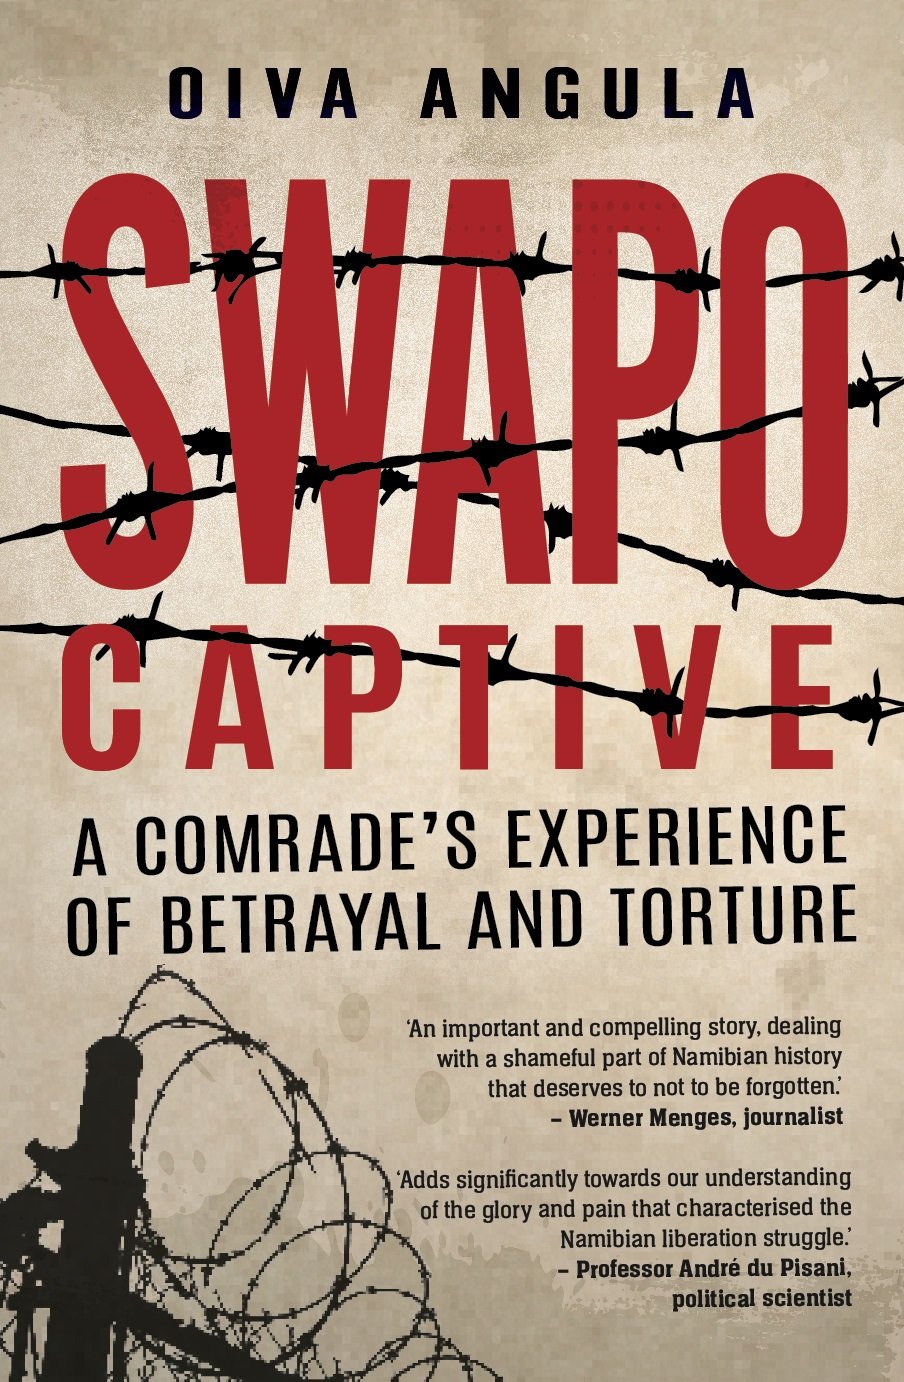 Swapo Captive, by Oiva Angula, is published by Penguin. It was published last month and retails for R230.